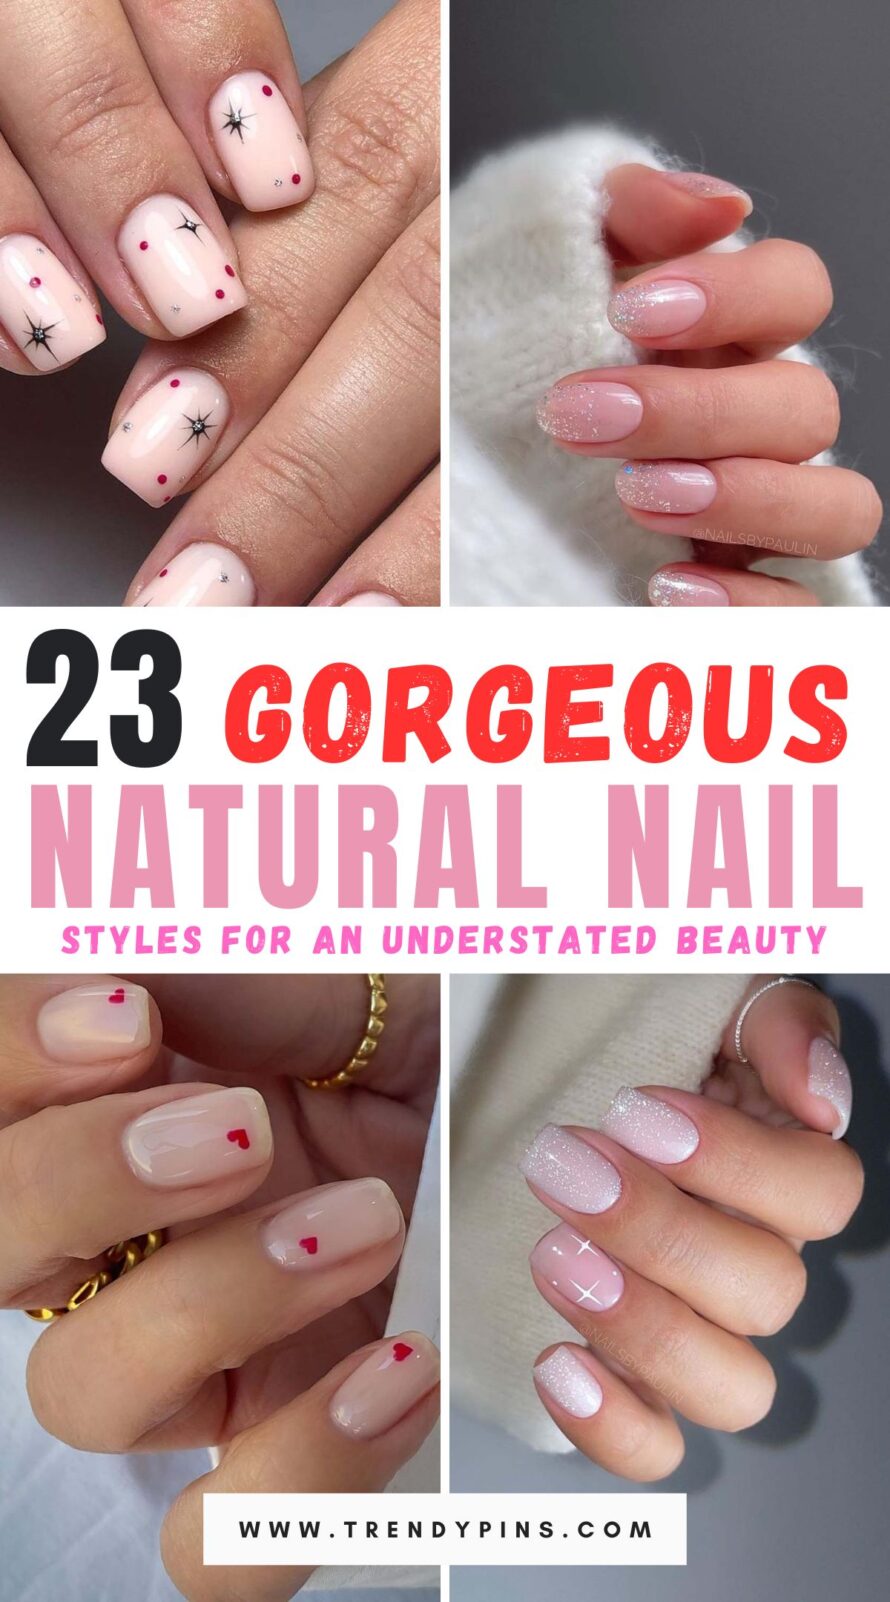 Explore 23 elegant natural nail designs that embody simplicity. Perfect for those who love a stunning, understated look.